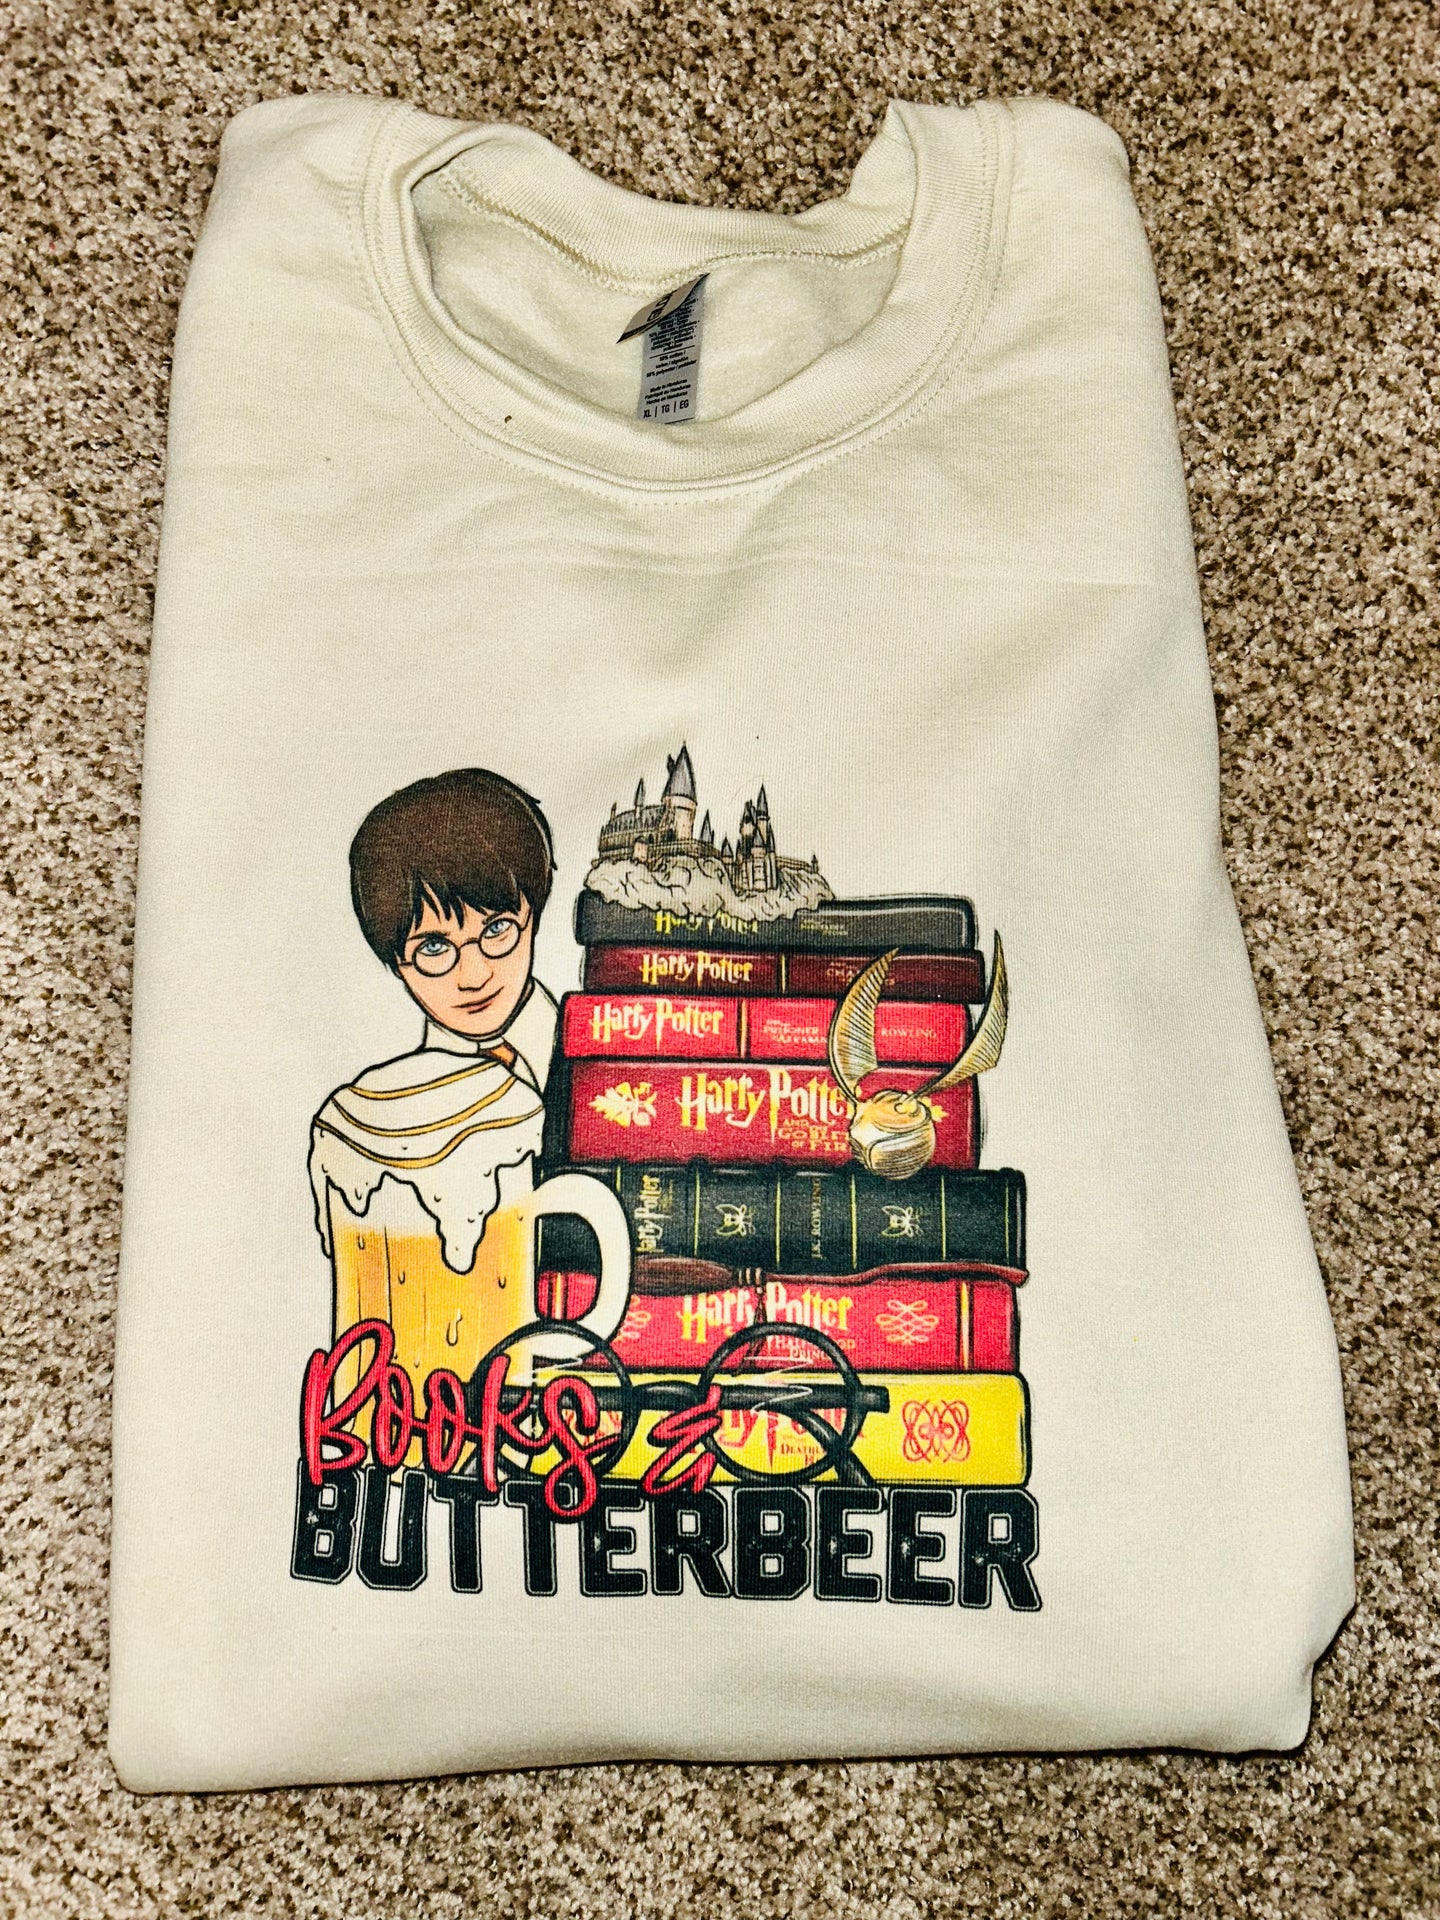 Books & Butterbeer PREORDER